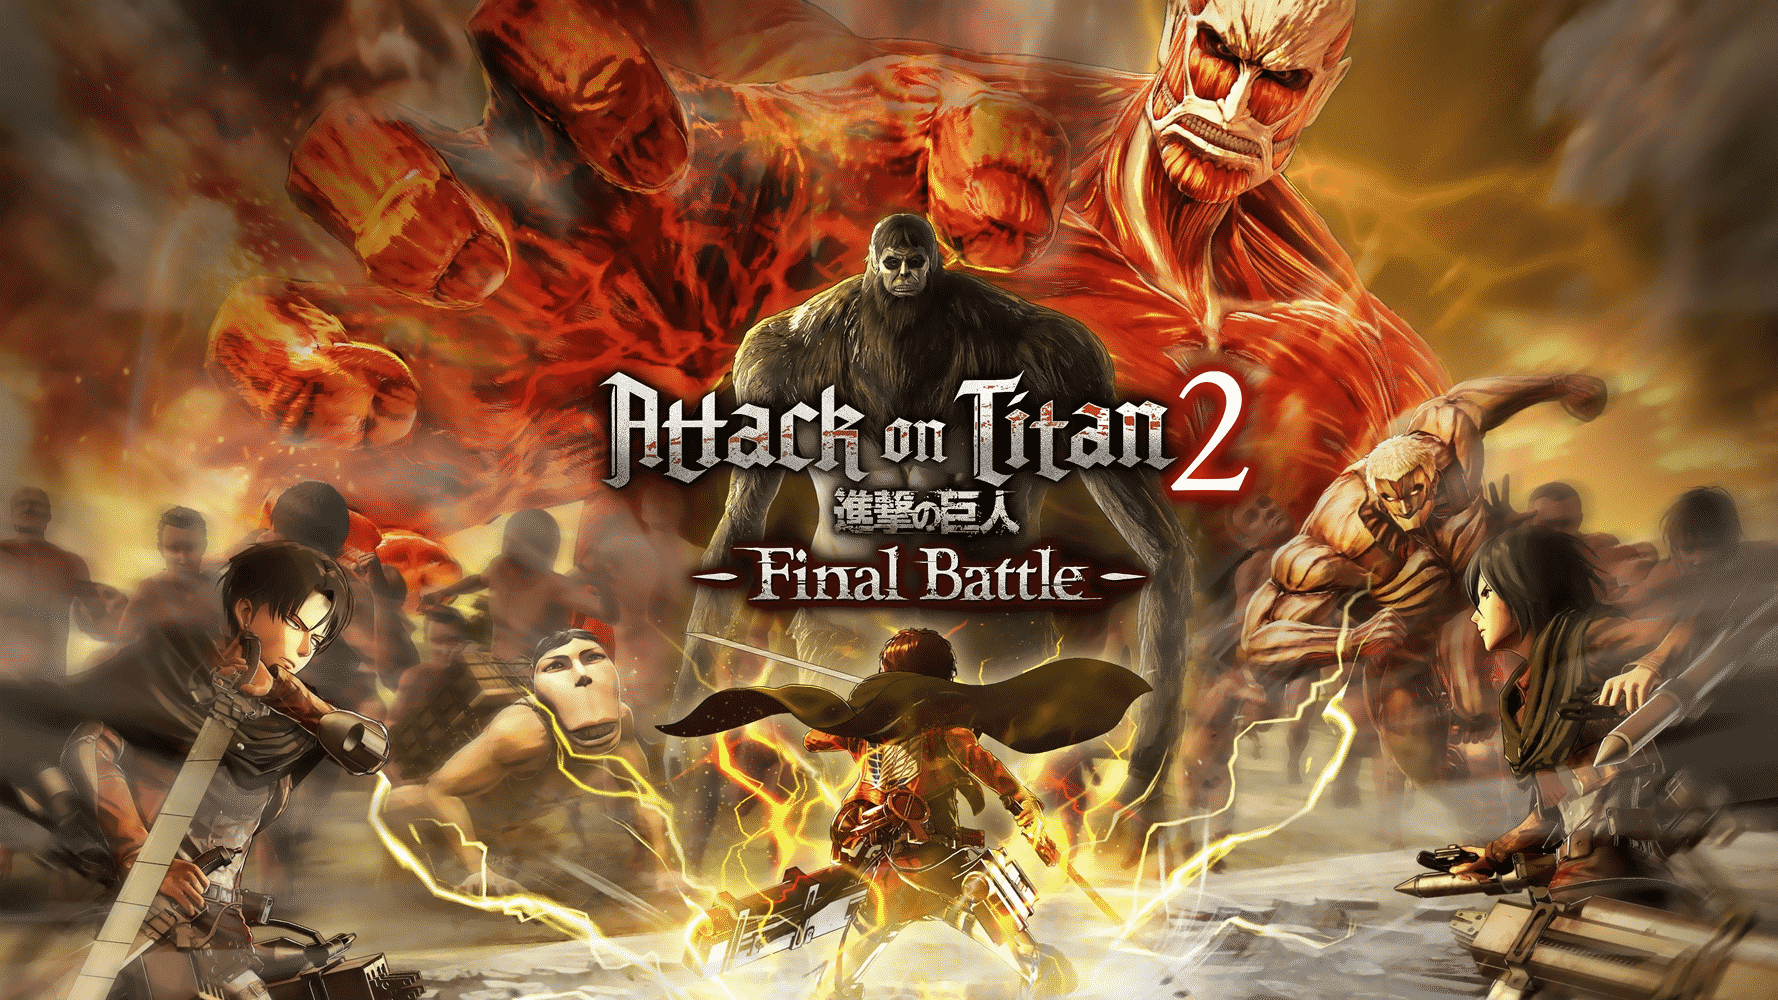 Attack on Titan 2 Final Battle PS4 Version Full Game Free Download